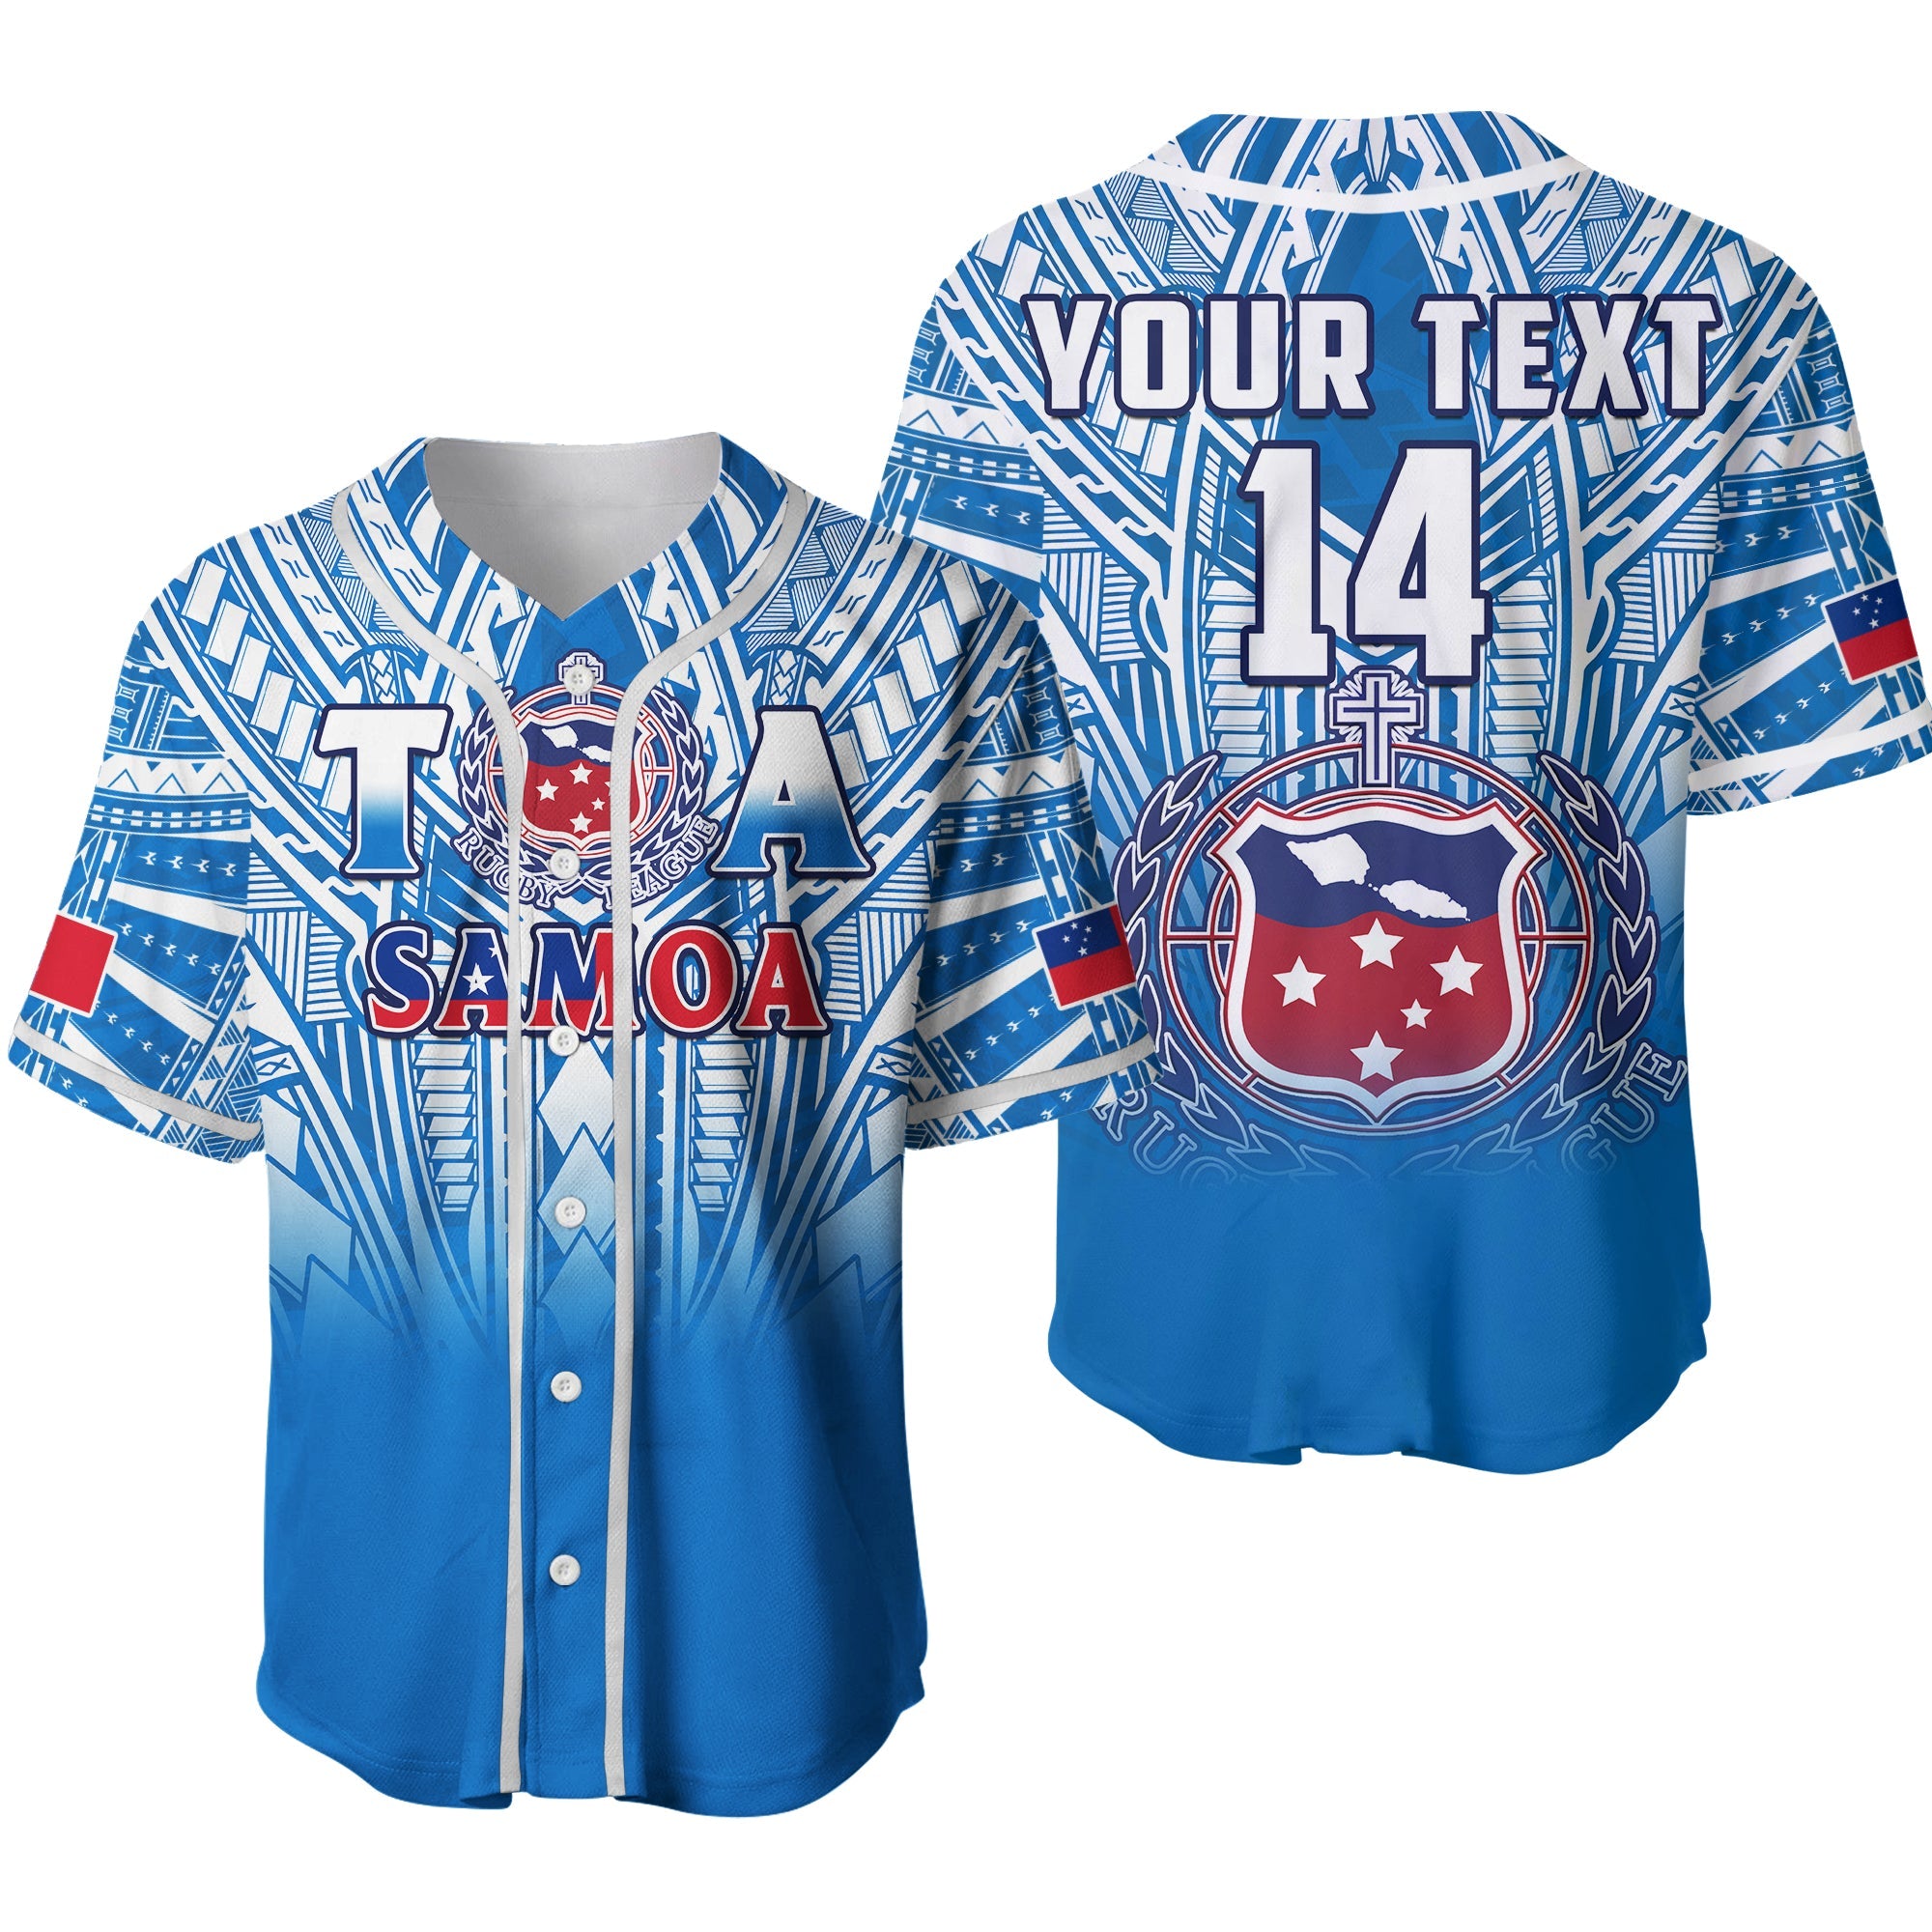 (Custom Text And Number) Samoa Rugby Baseball Jersey Personalise Toa Samoa Polynesian Pacific Blue Version Ver.02 LT14 Blue - Polynesian Pride